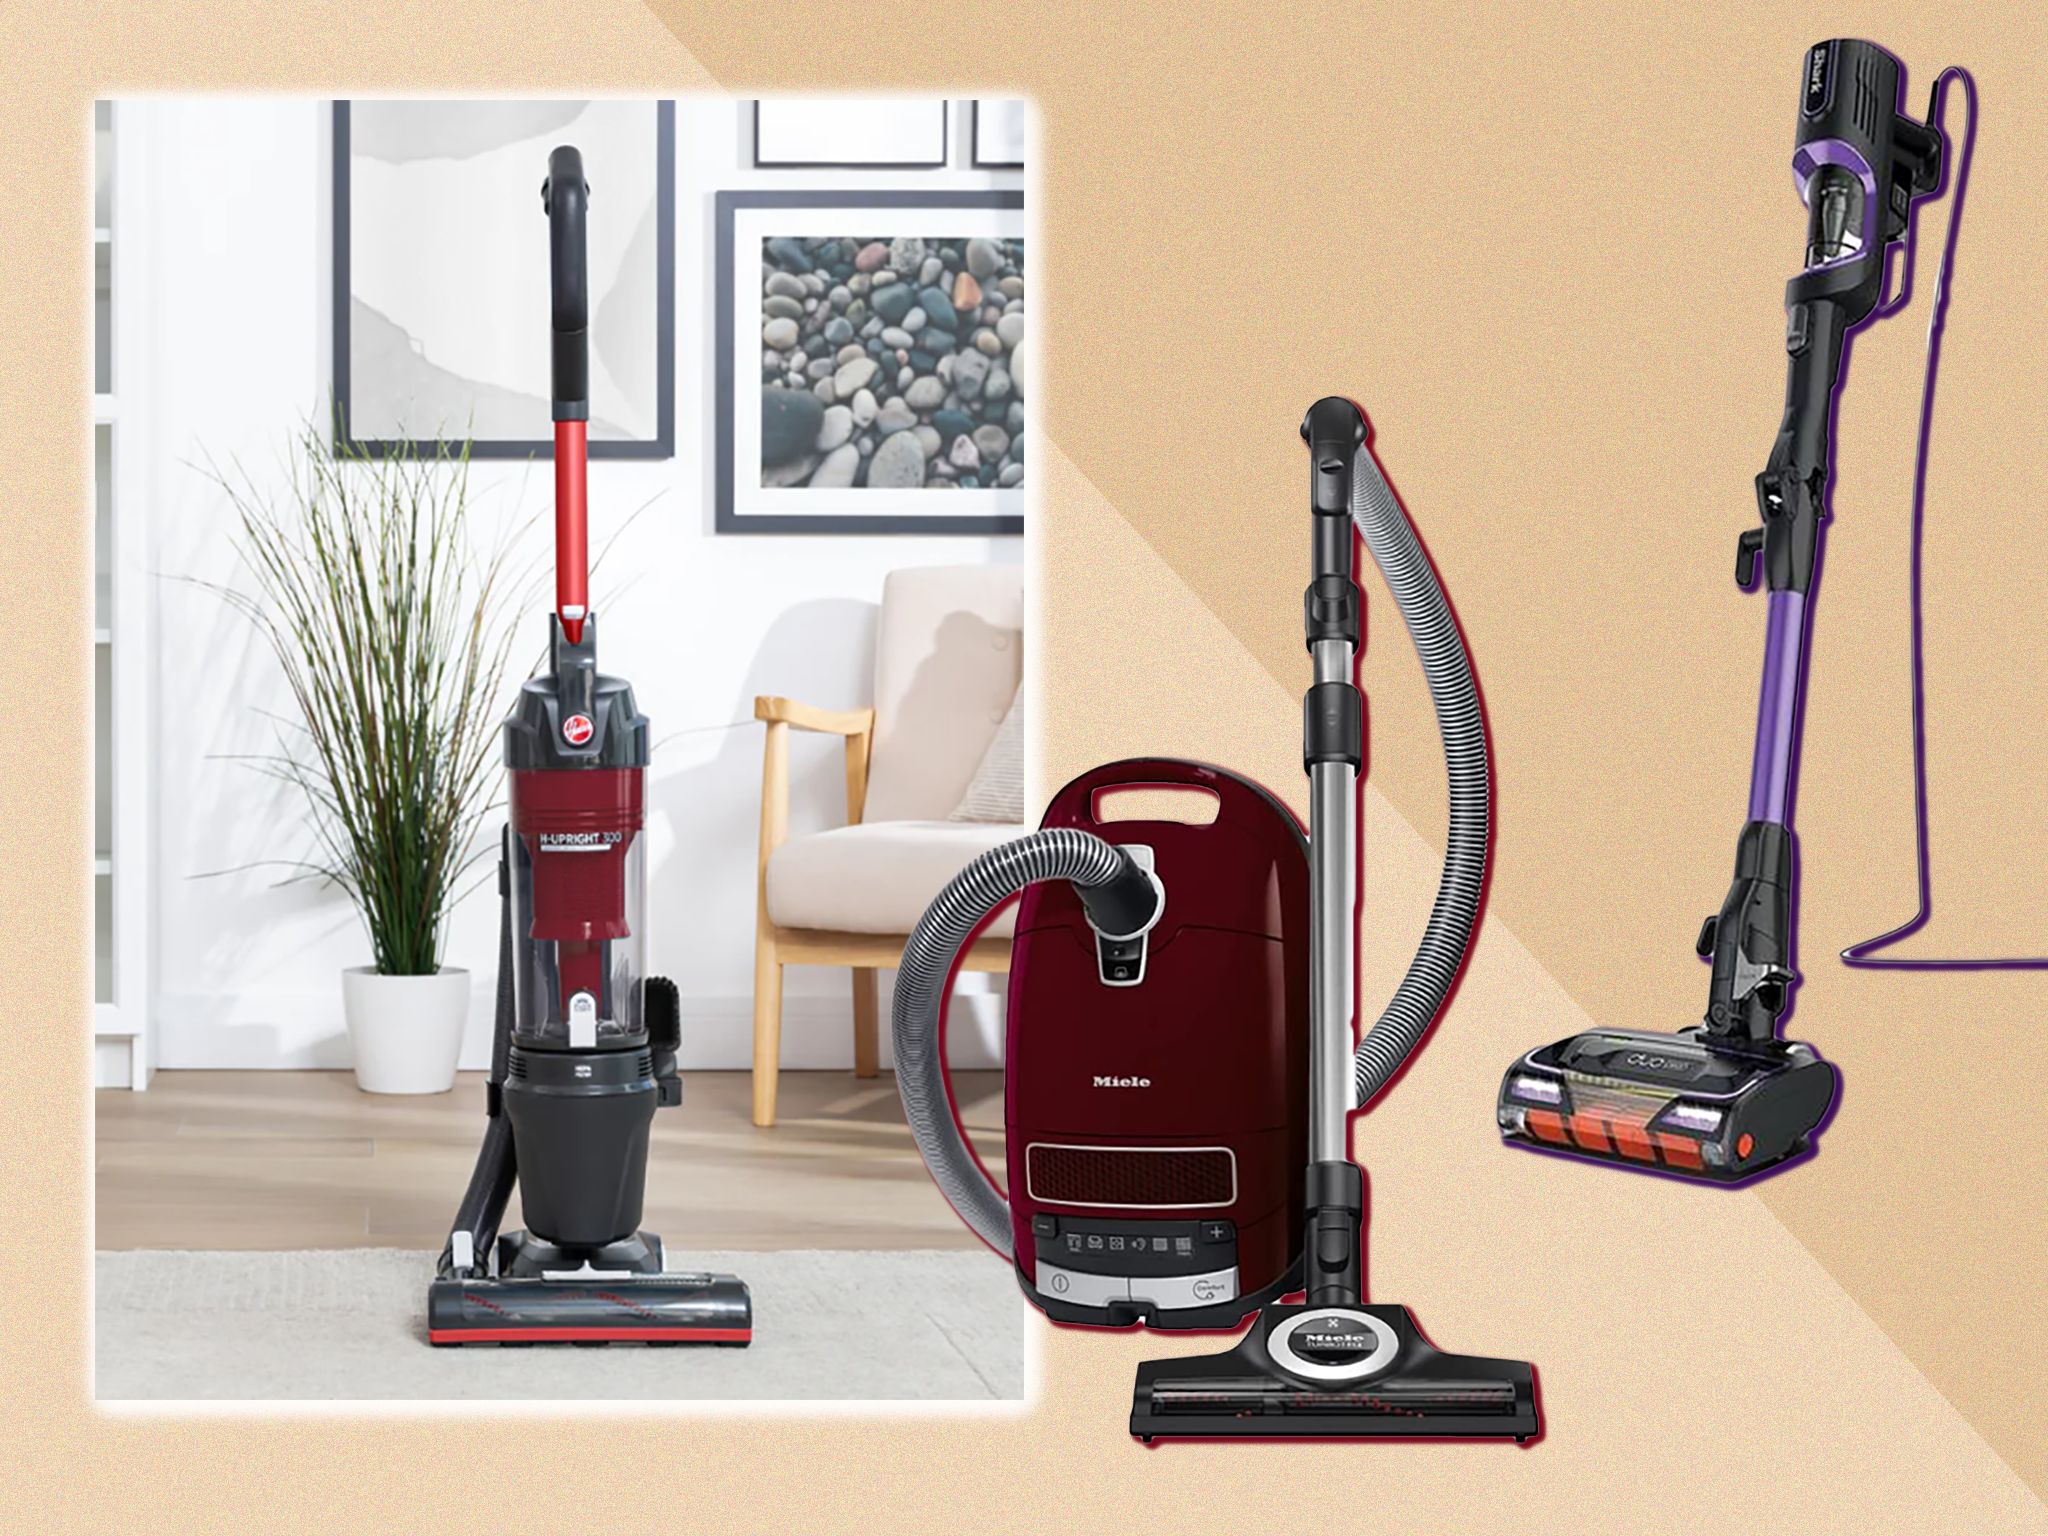 https://static.independent.co.uk/2023/05/26/17/best%20corded%20vacuums.png